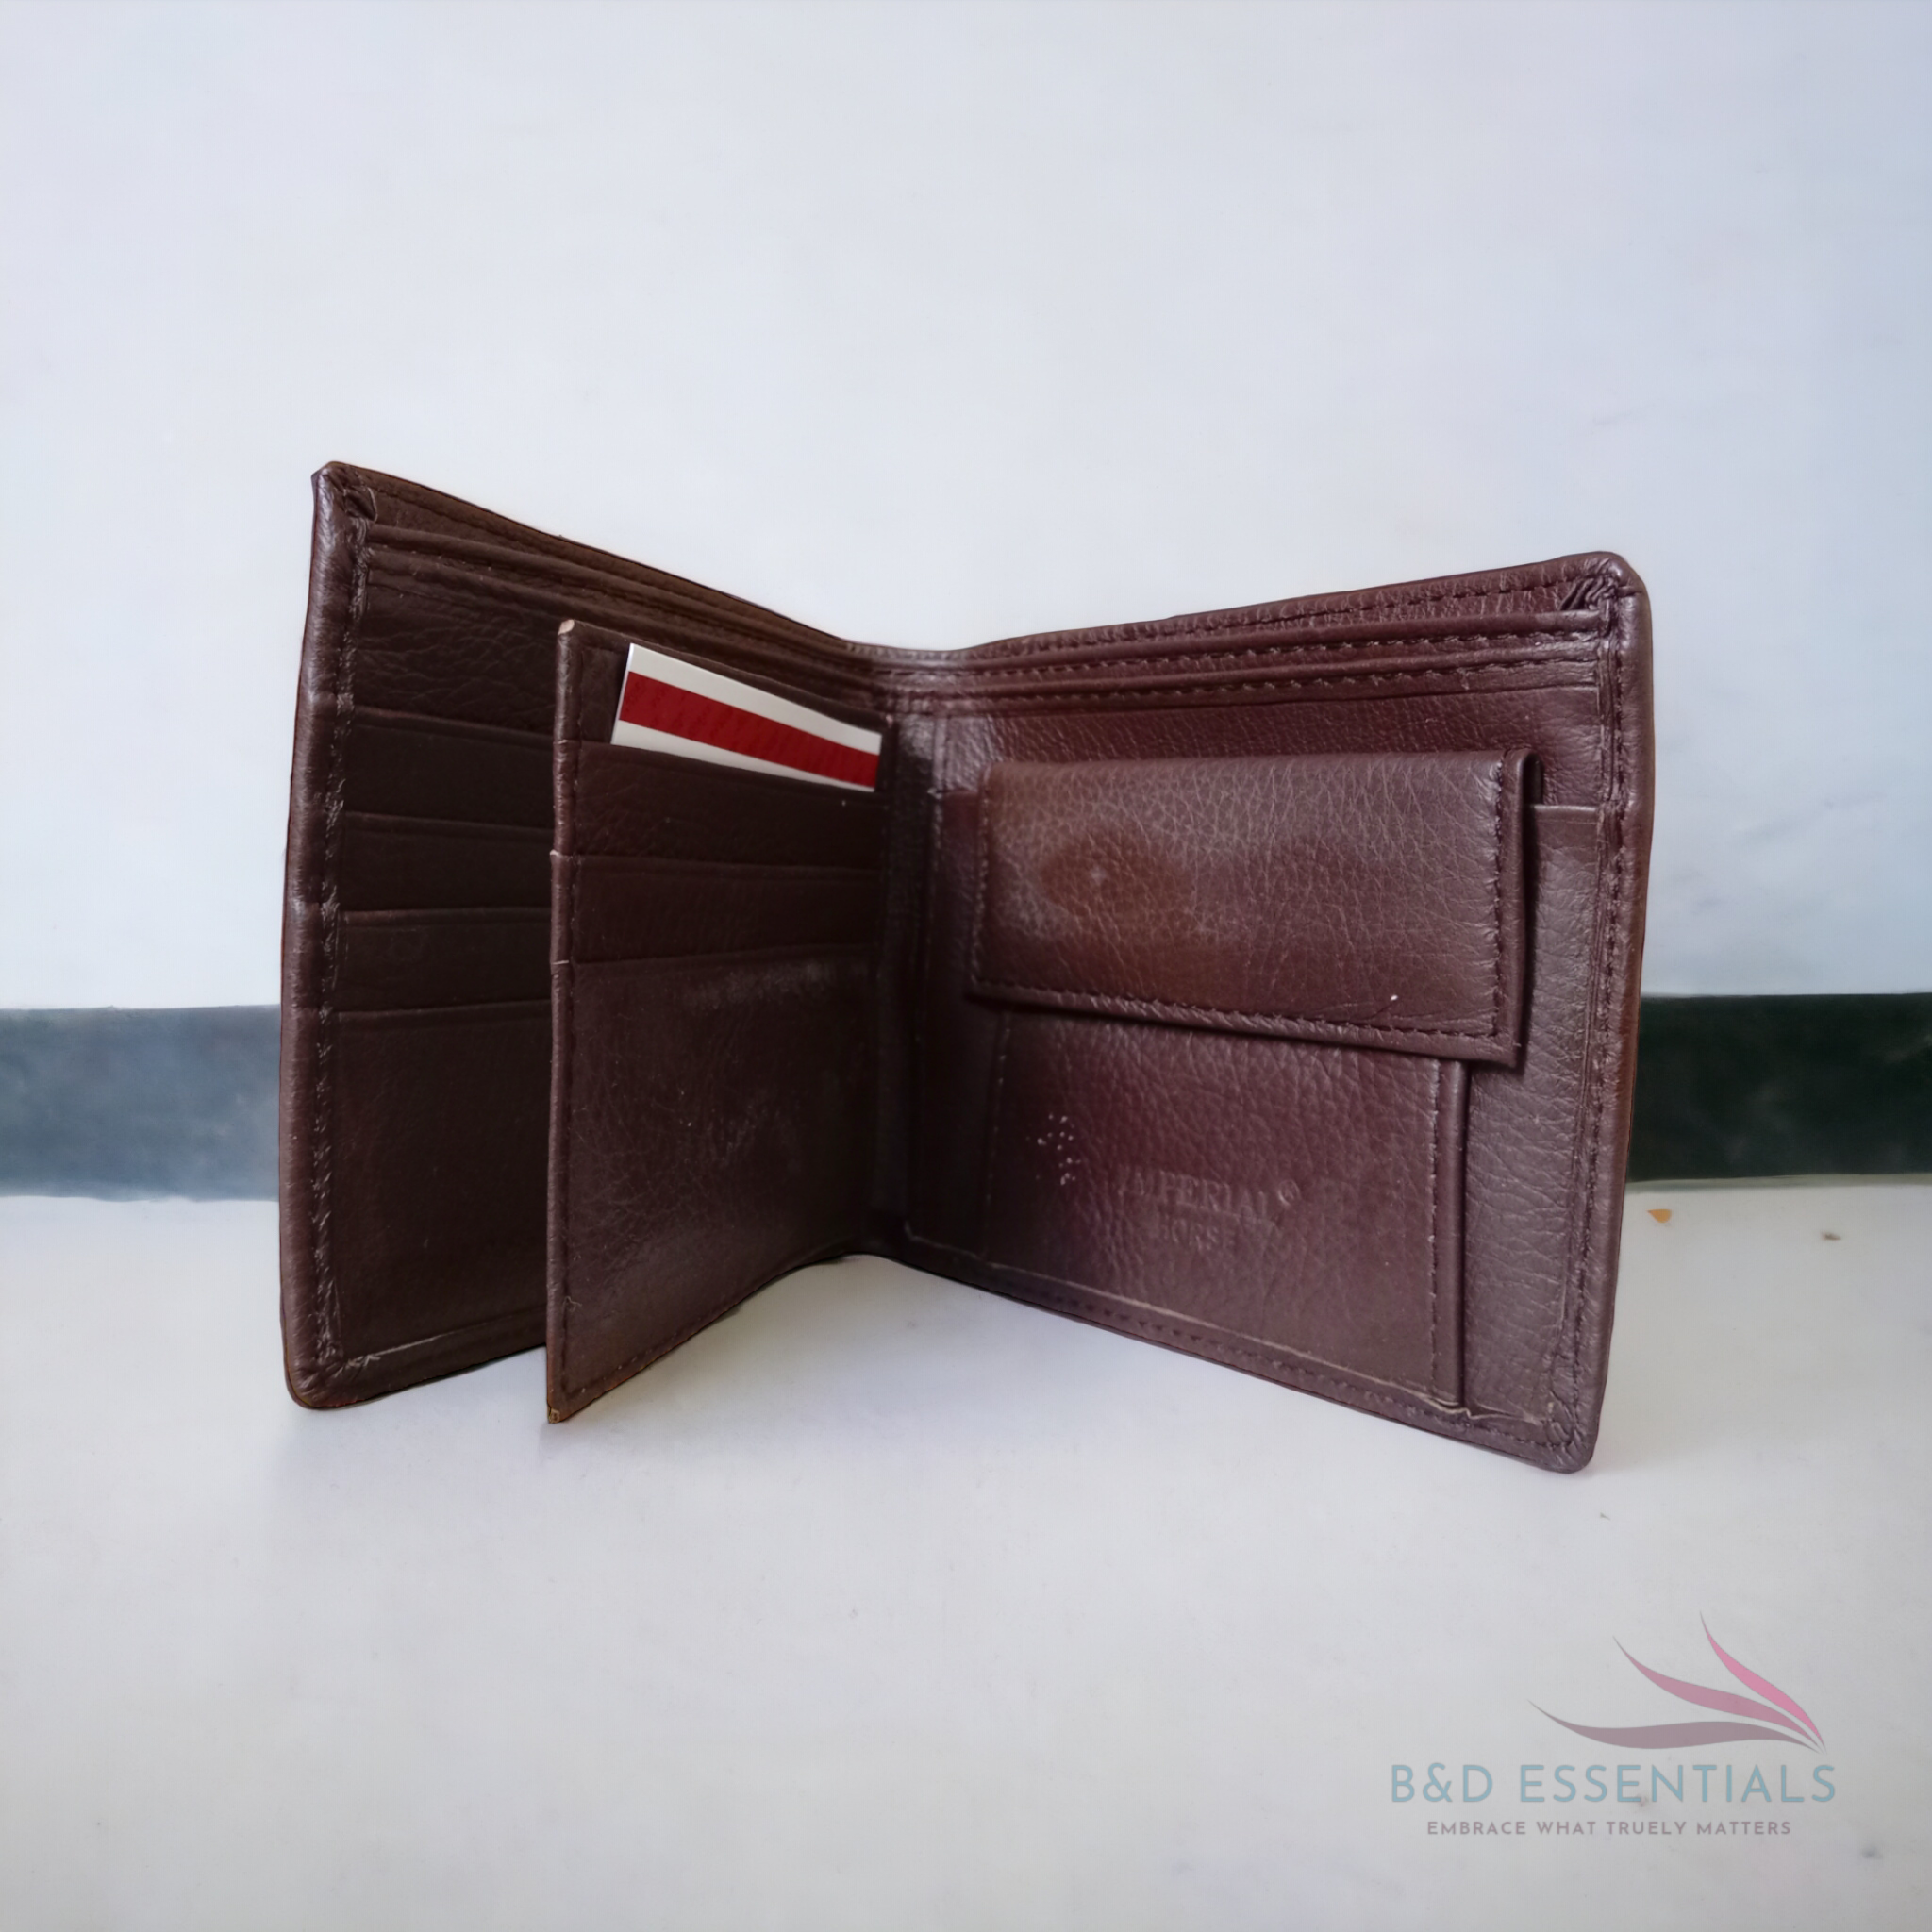 IMPERIAL HORSE: Genuine Leather Wallets and Spacious Cardholder